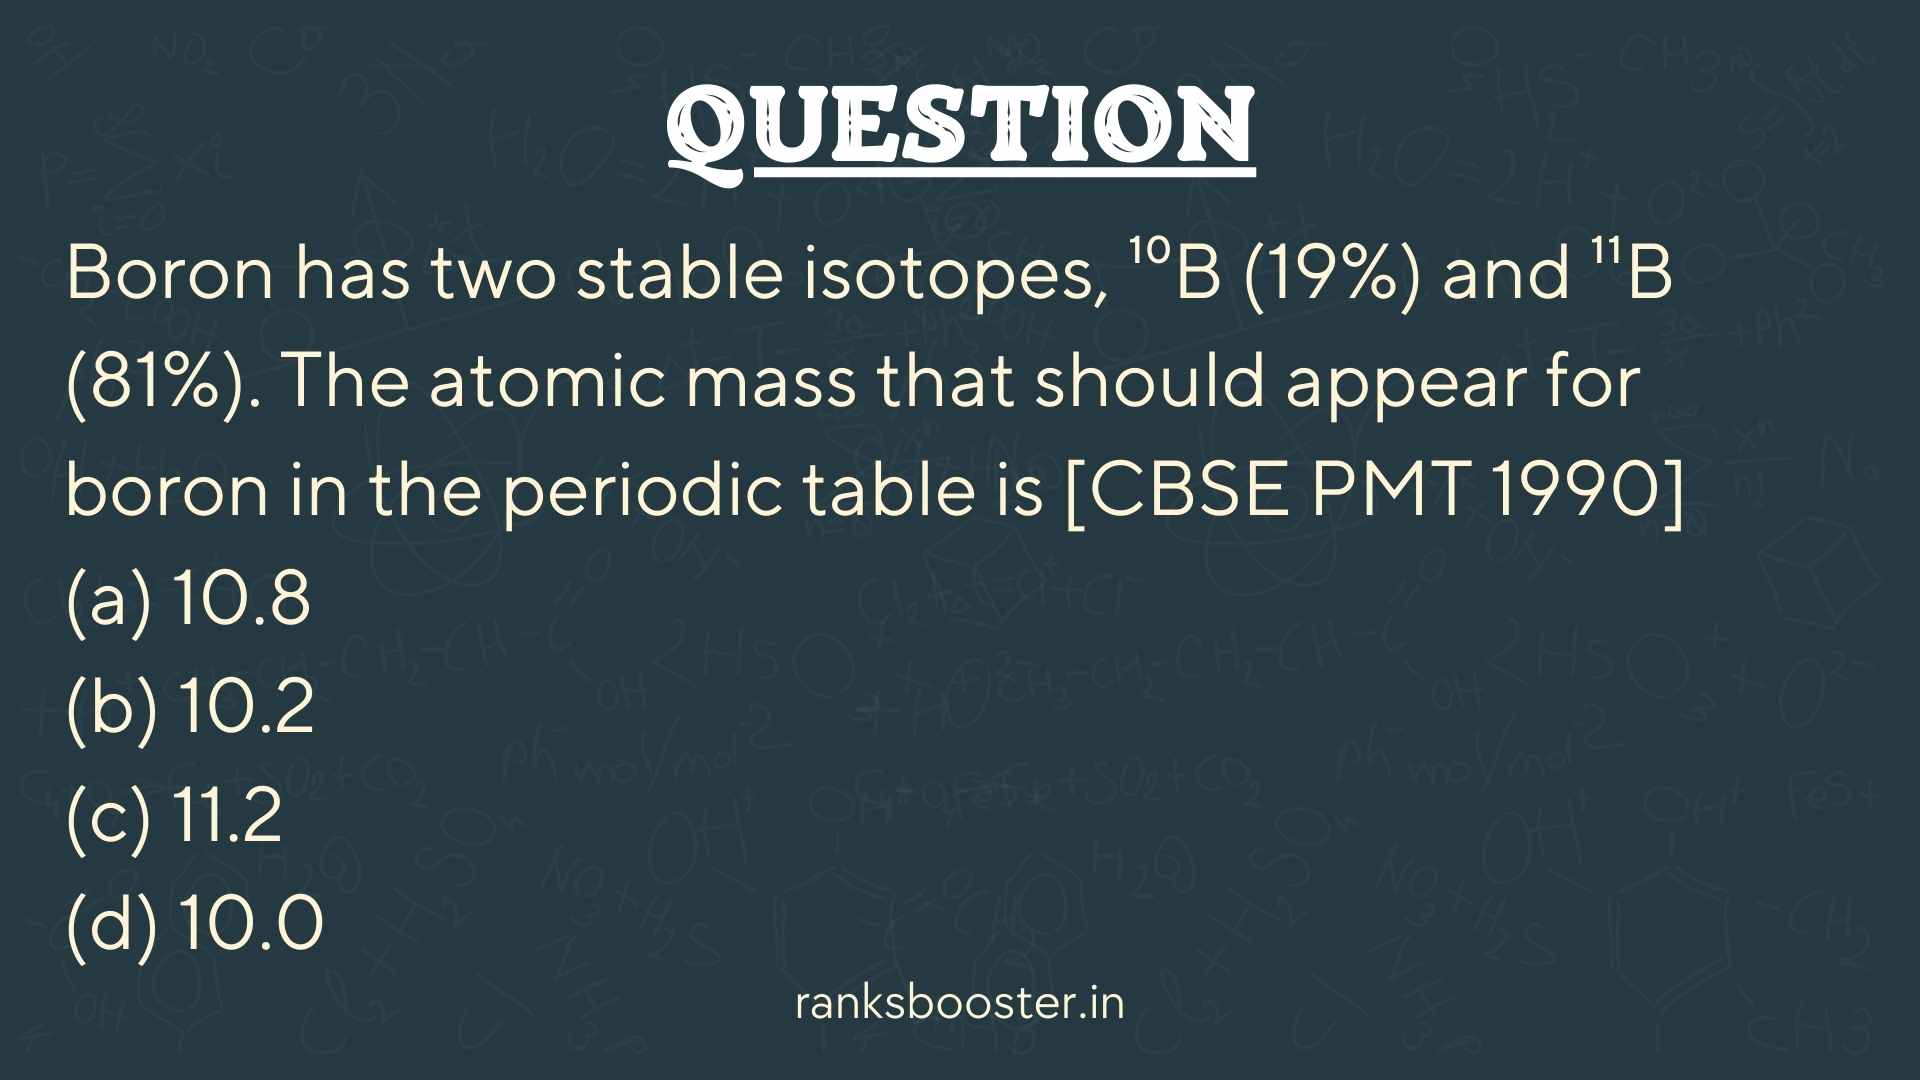 Question: Boron has two stable isotopes, ¹⁰B (19%) and ¹¹B (81%). The atomic mass that should appear for boron in the periodic table is [CBSE PMT 1990] (a) 10.8 (b) 10.2 (c) 11.2 (d) 10.0